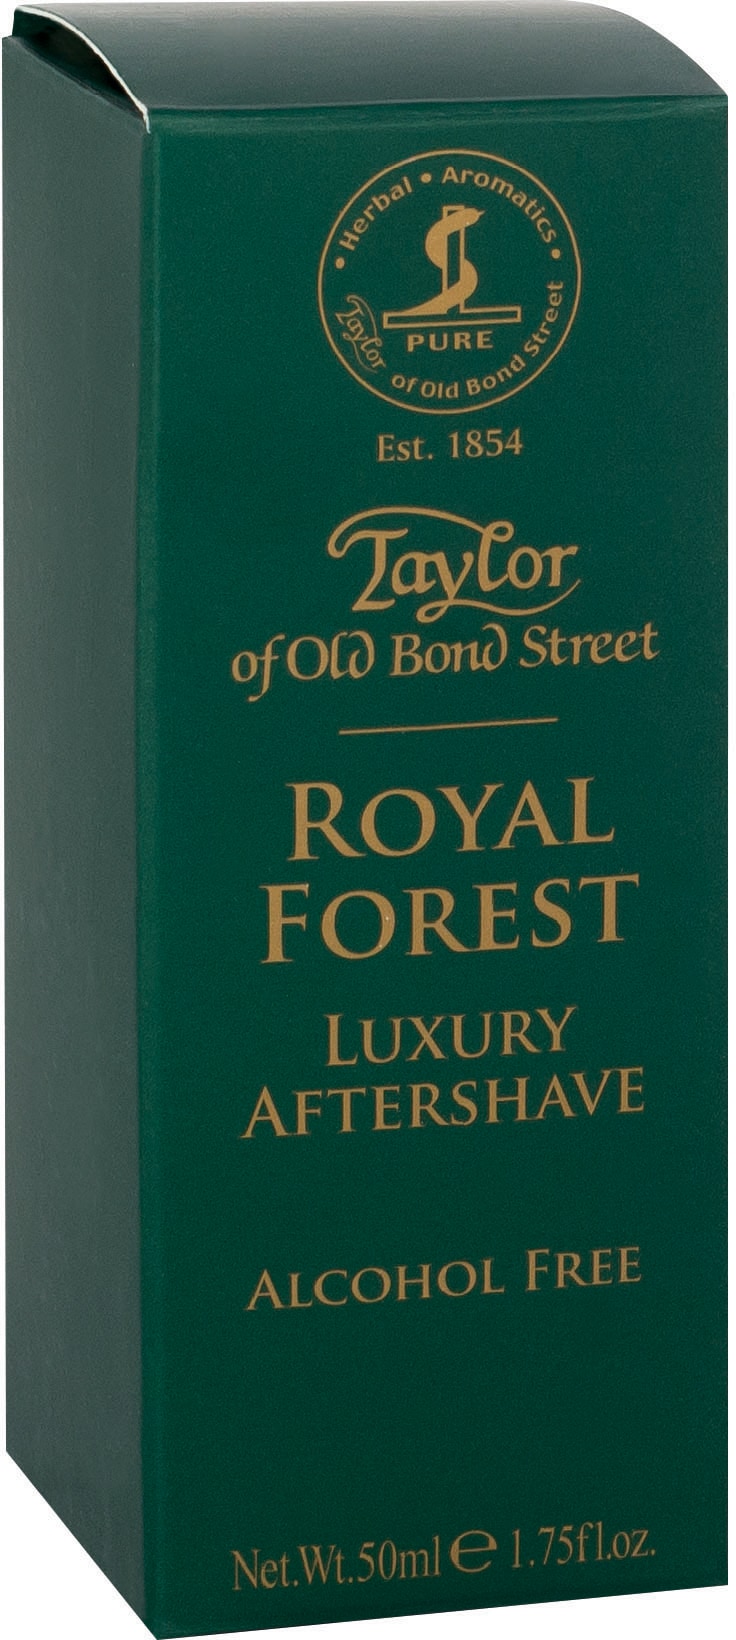 Taylor After-Shave Aftershave Royal Forest« Bond of Street Old »Luxury